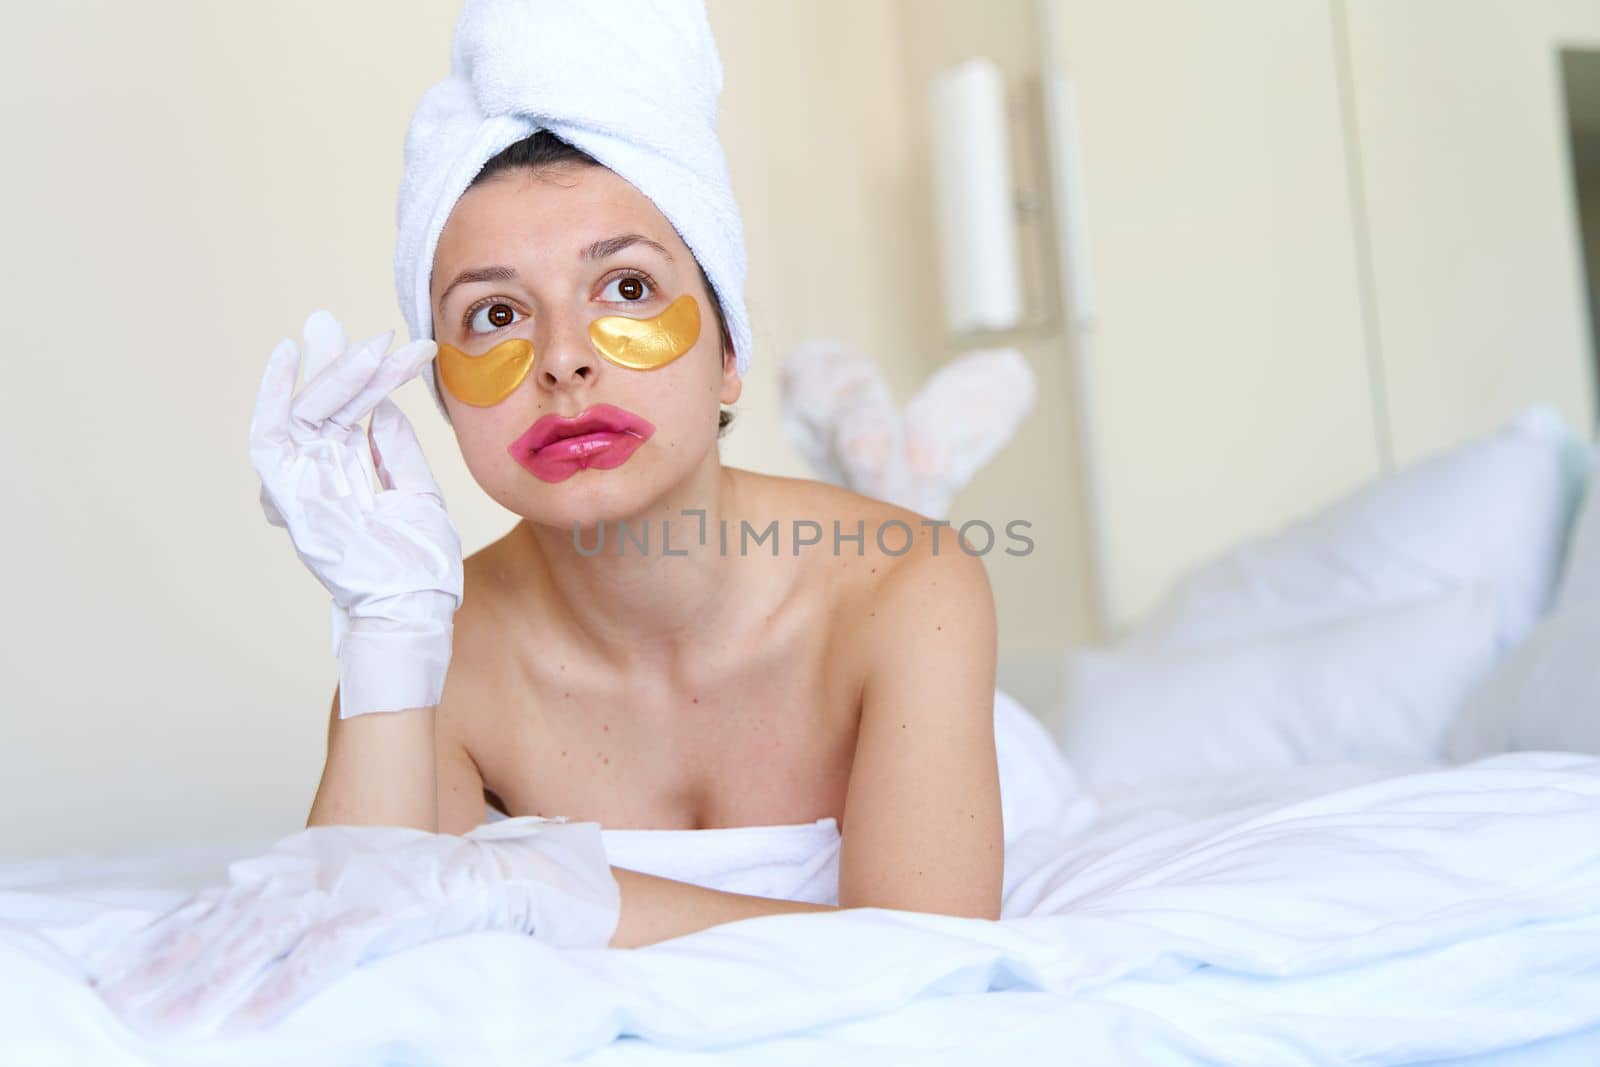 After a shower, a girl wrapped in a towel uses cosmetic patches for the skin under the eyes, lips and gloves to moisturize her hands and feet. Cosmetic trends for body care at home.